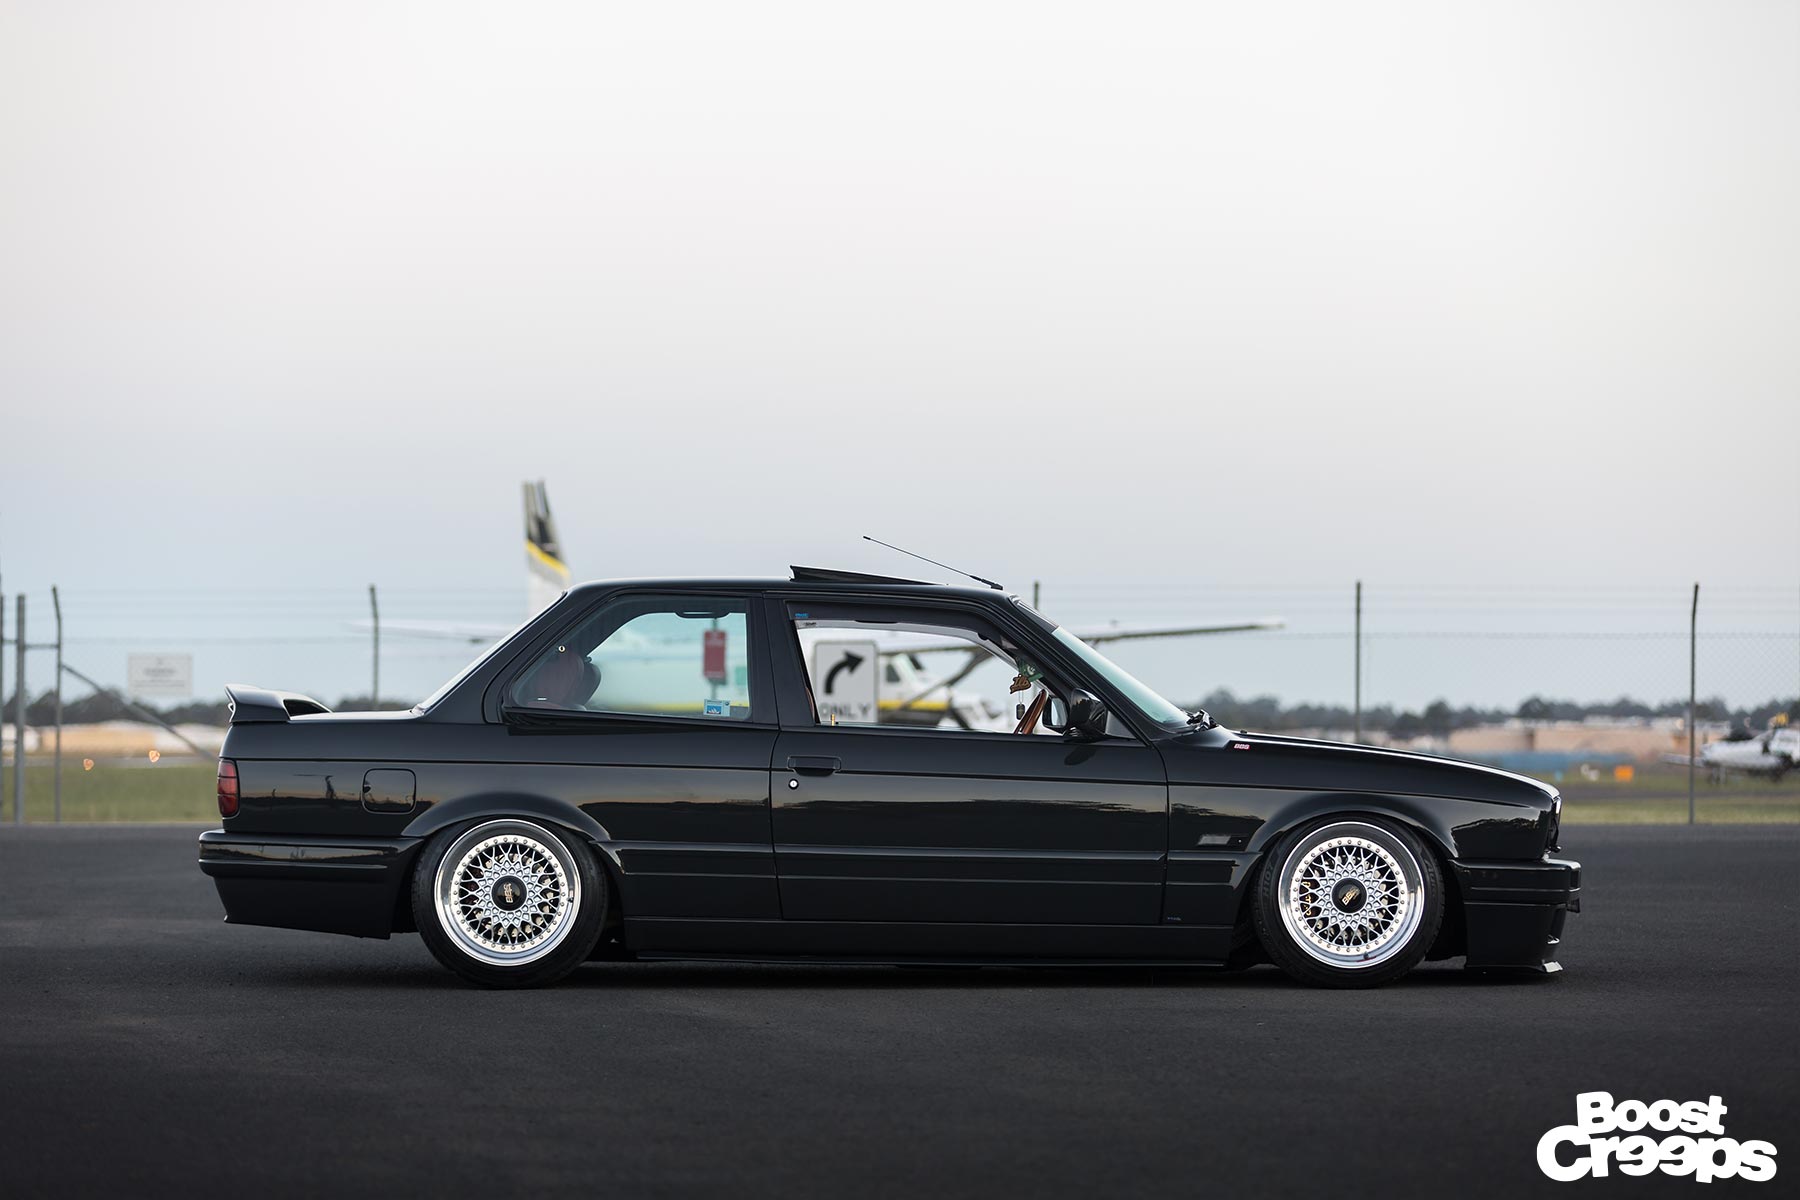 Daylin’s BBS Equipped E30 Is As Clean As They Come